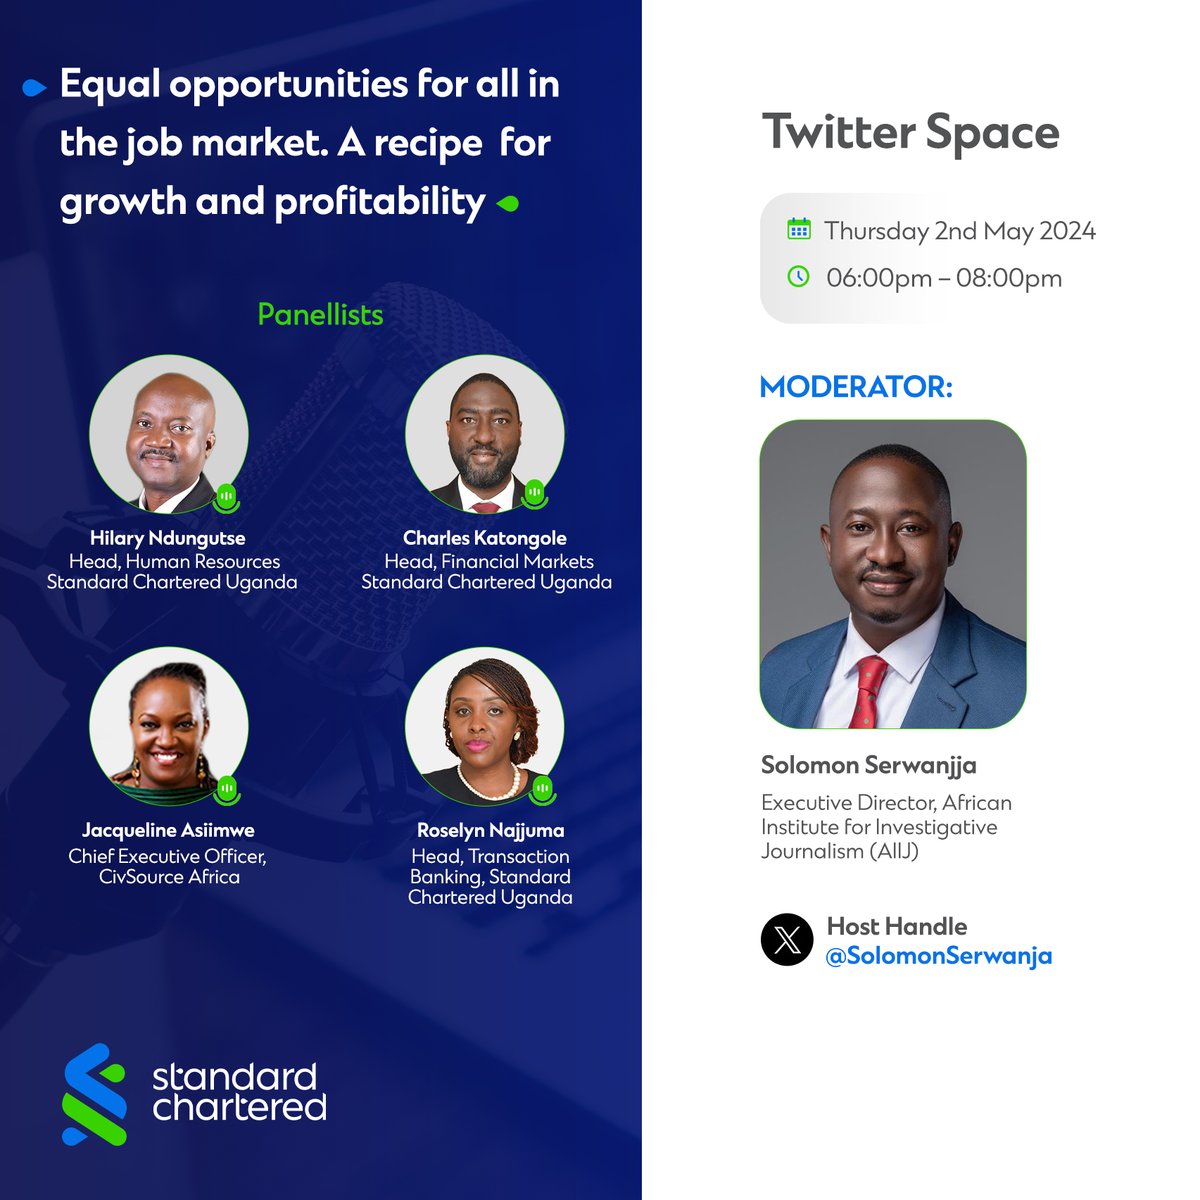 We're back with another exciting and engaging X space hosted by @SolomonSerwanjj. Today, we will discuss 'Equal opportunities for all in the job market. A recipe for growth and profitability.' We look forward to hearing your views. #HereForGood #Xspace